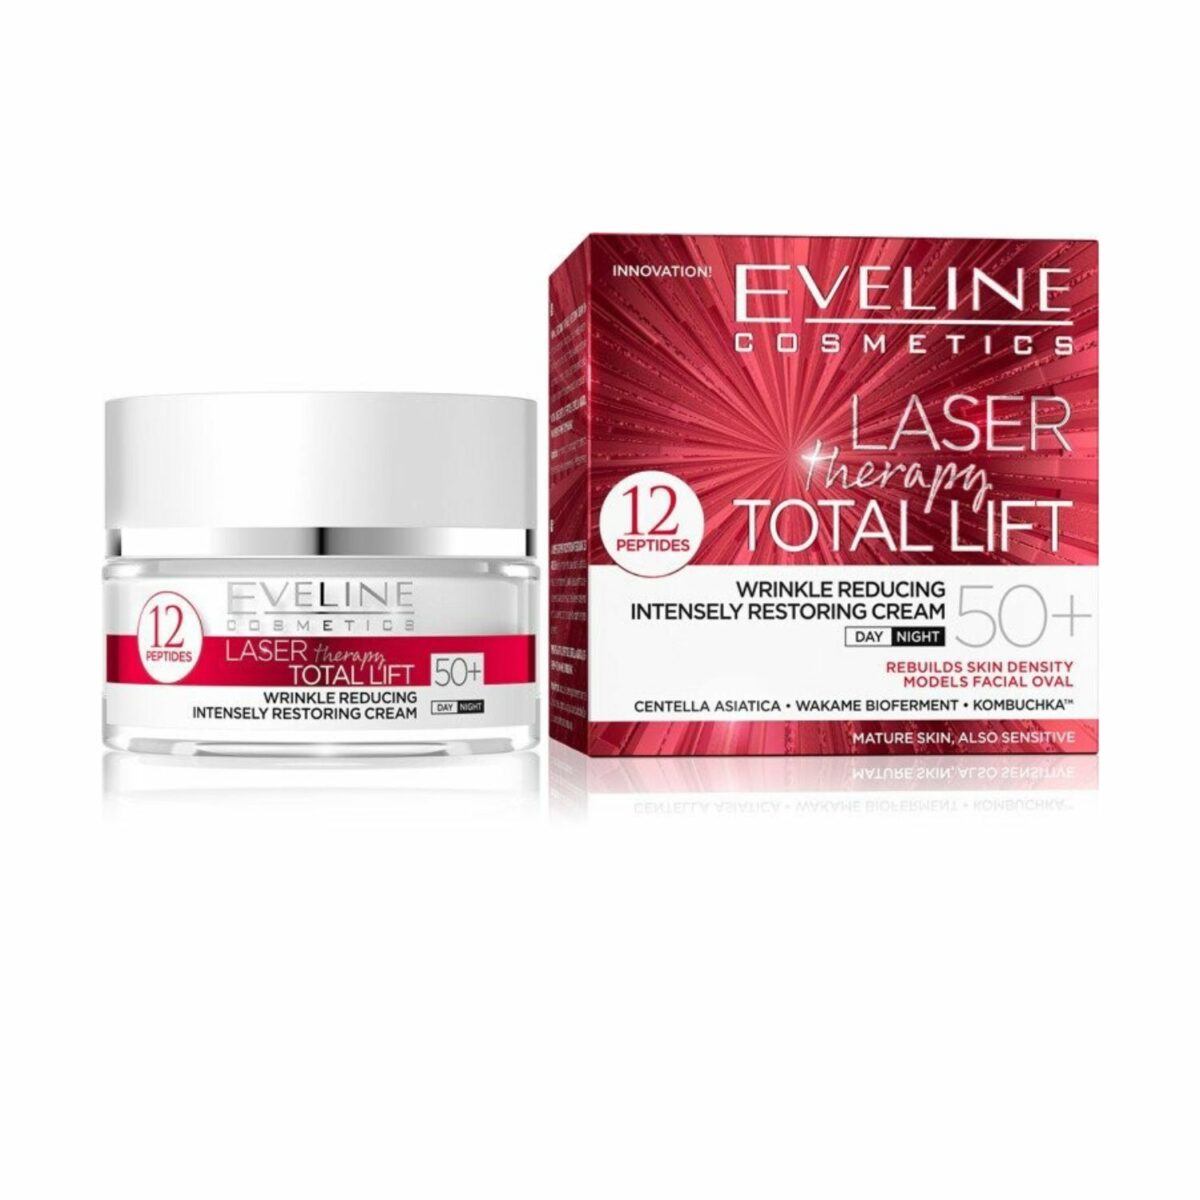 Eveline Laser Therapy Total Lift Day&Night cream 50+ 50ml